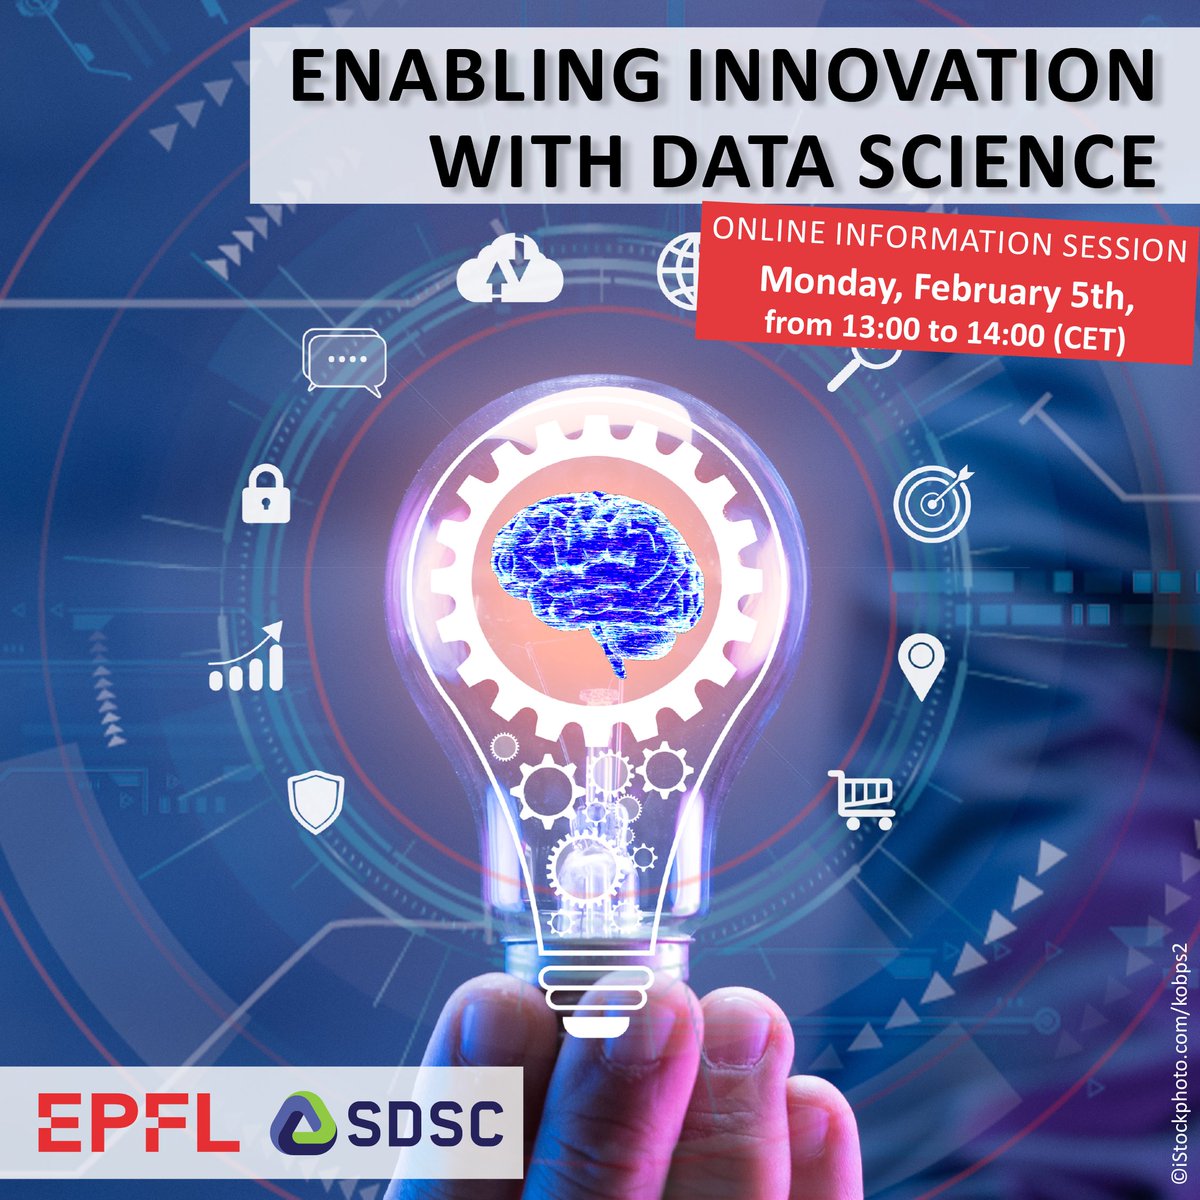 Join us for an inspiring online information session on Monday, February 5th, from 13:00 to 14:00 CET, to explore how you can use data to improve decisions and processes in your organization. ✅Don't miss the opportunity to learn more about 'Enabling Innovation with Data…